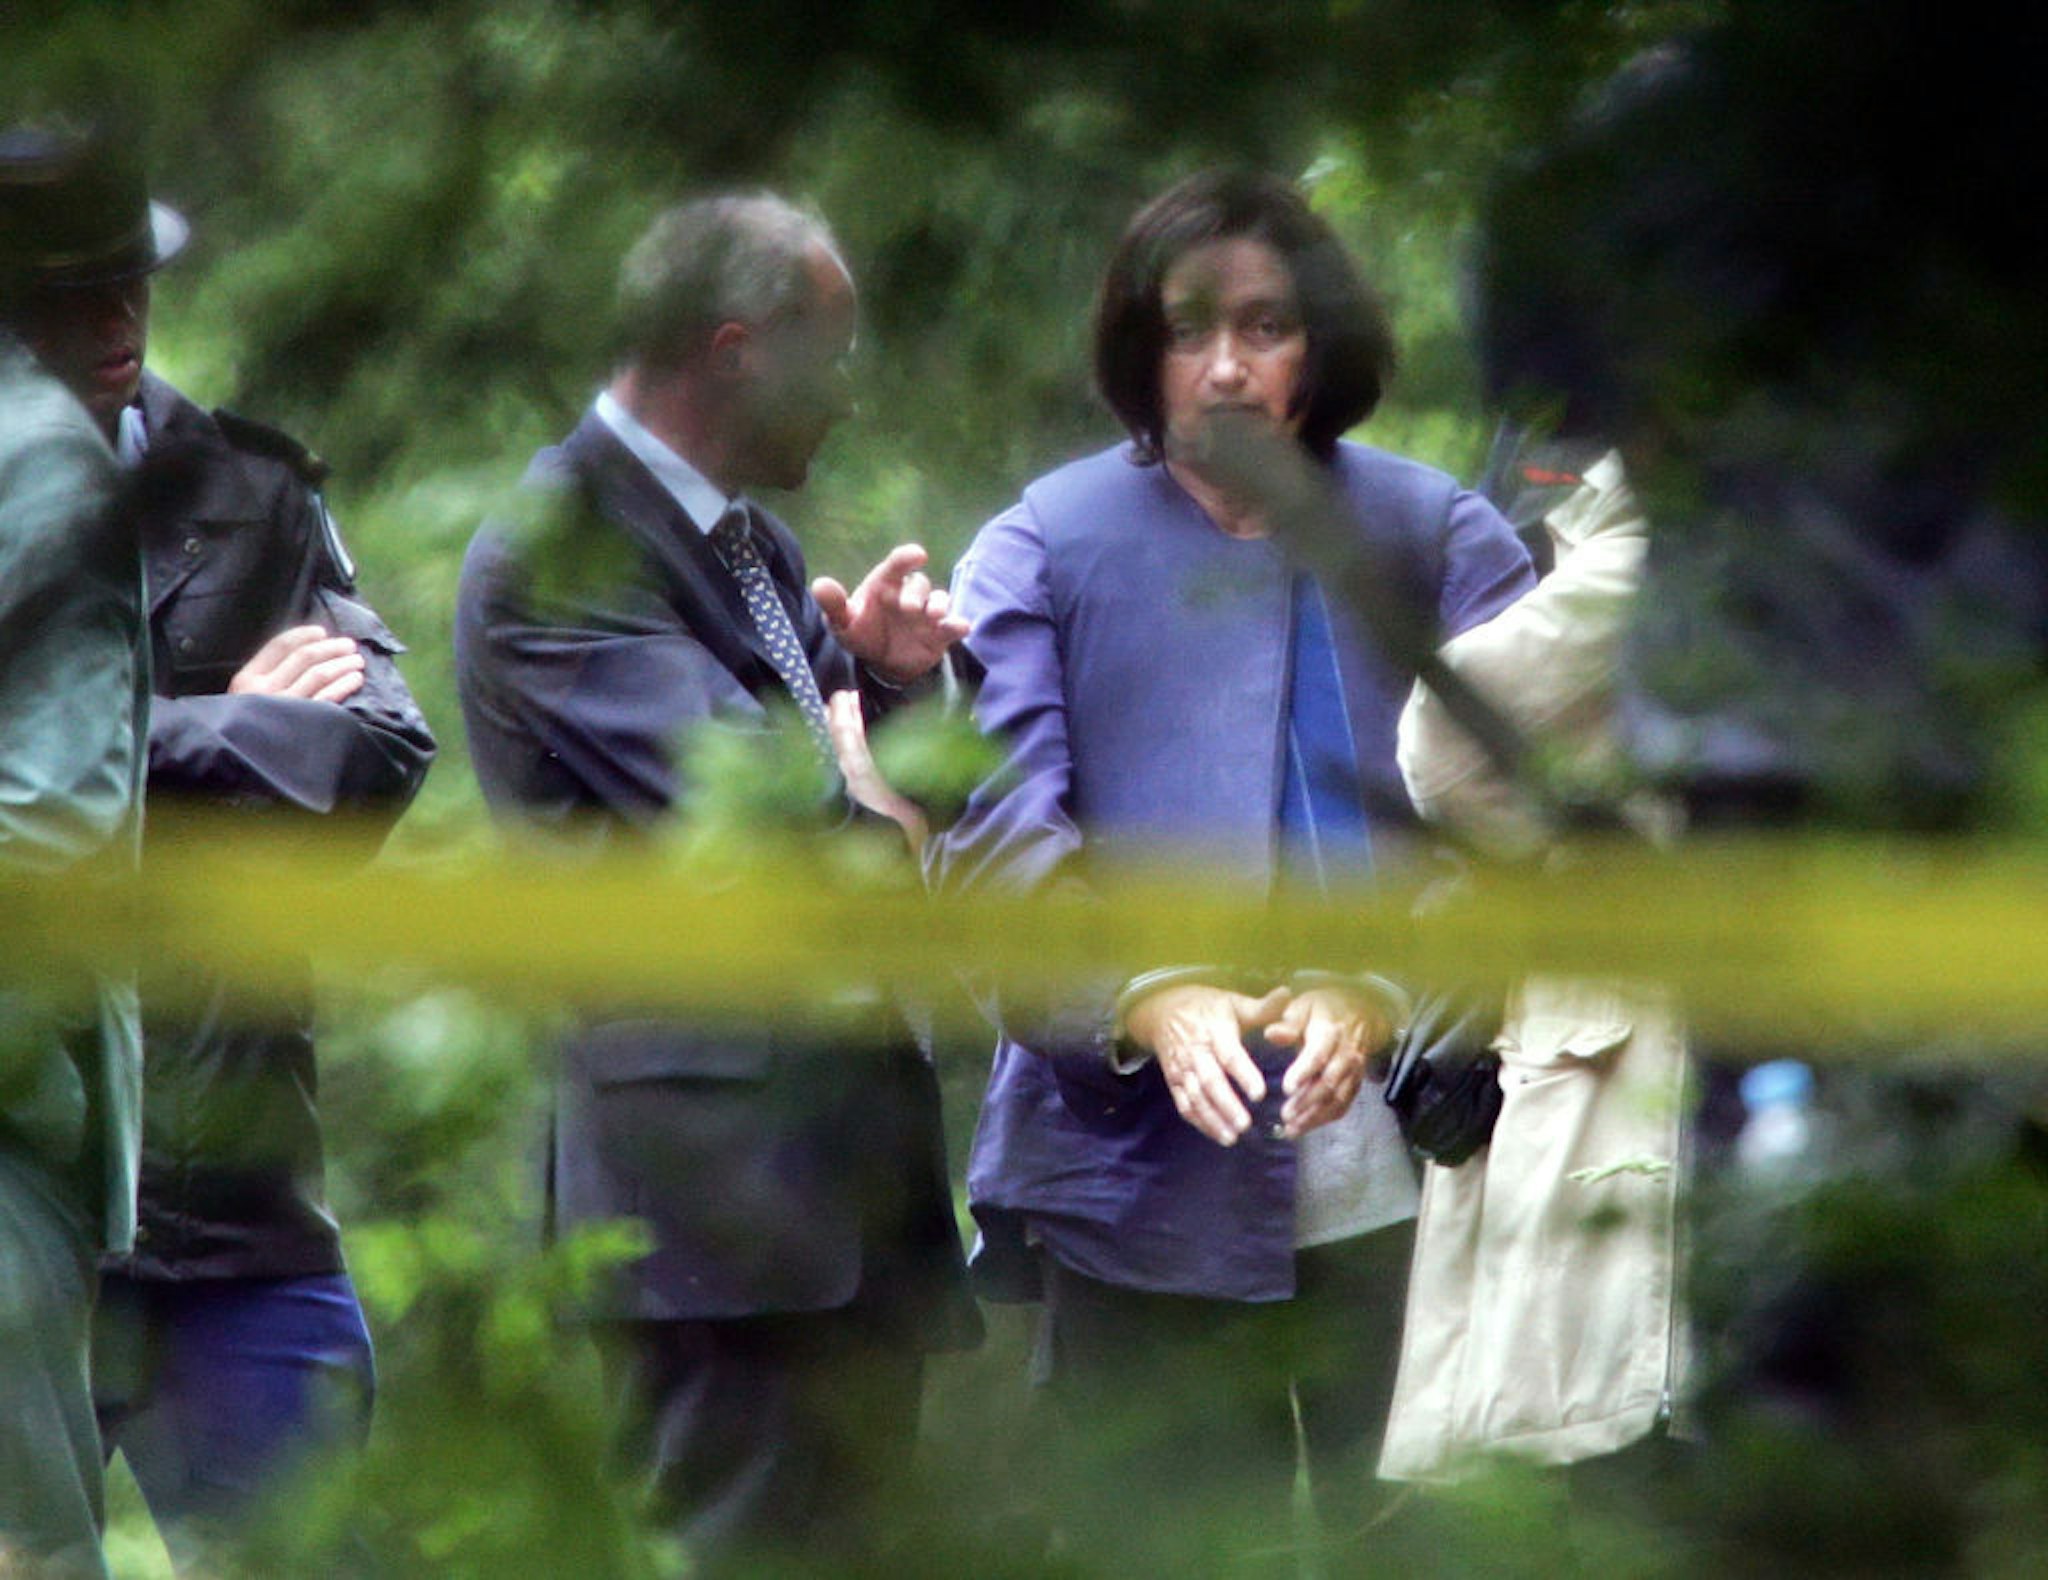 Monique Olivier, the wife of Frenchman Michel Fourniret who confessed to burying two of his nine young victims, accompanies police at the scene where investigators are digging in the grounds of the chateau 'Le Sautou' near Donchery, northern France, July 3, 2004 to recover the remains of the victims.